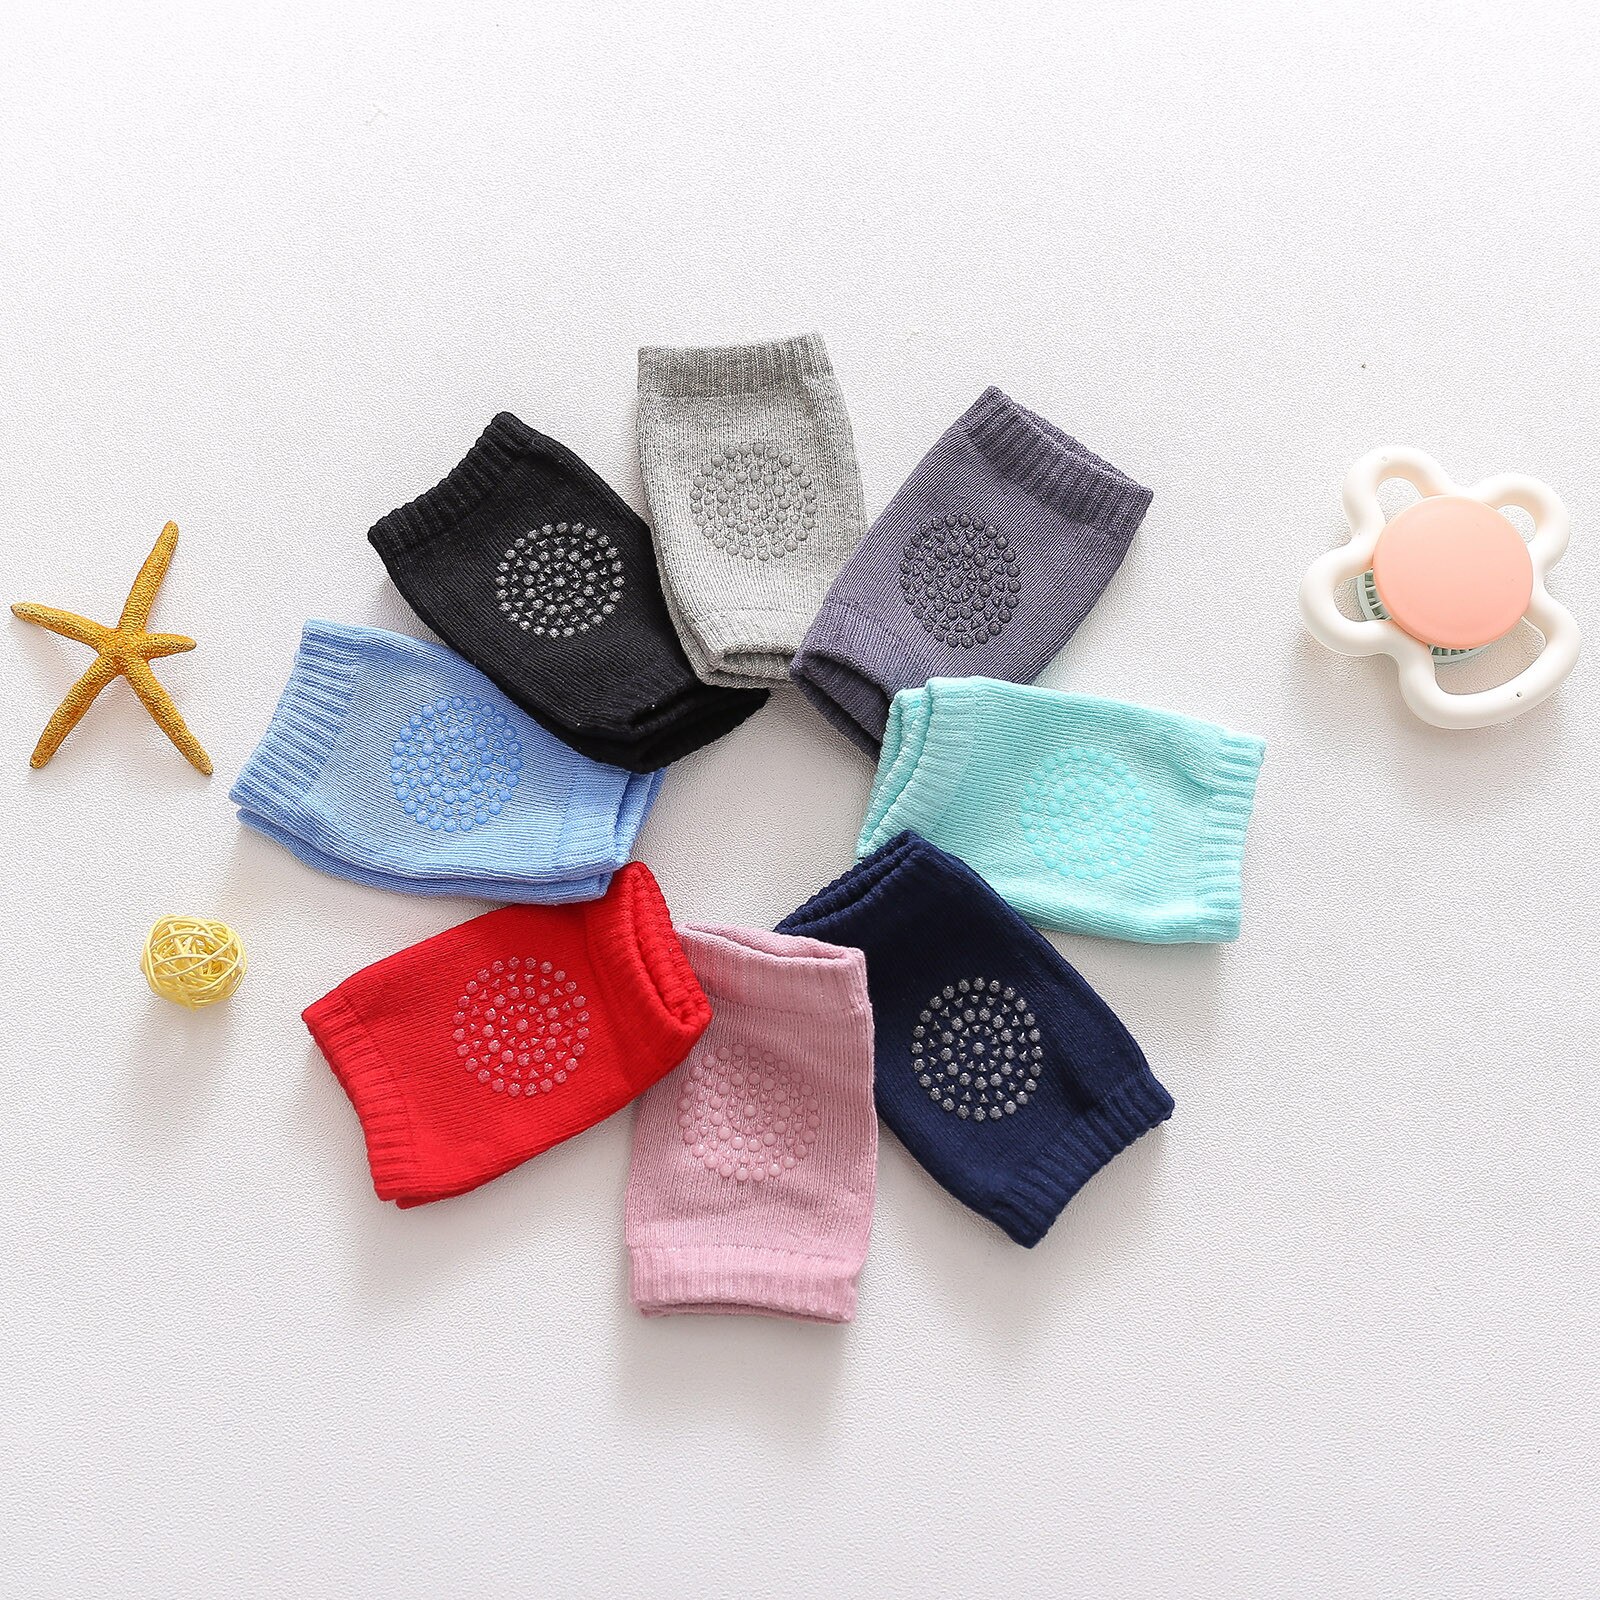 1 Pair Cozy Baby knee pad kids safety crawling elbow cushion infant toddlers baby leg warmer Knee Support Protector 2022